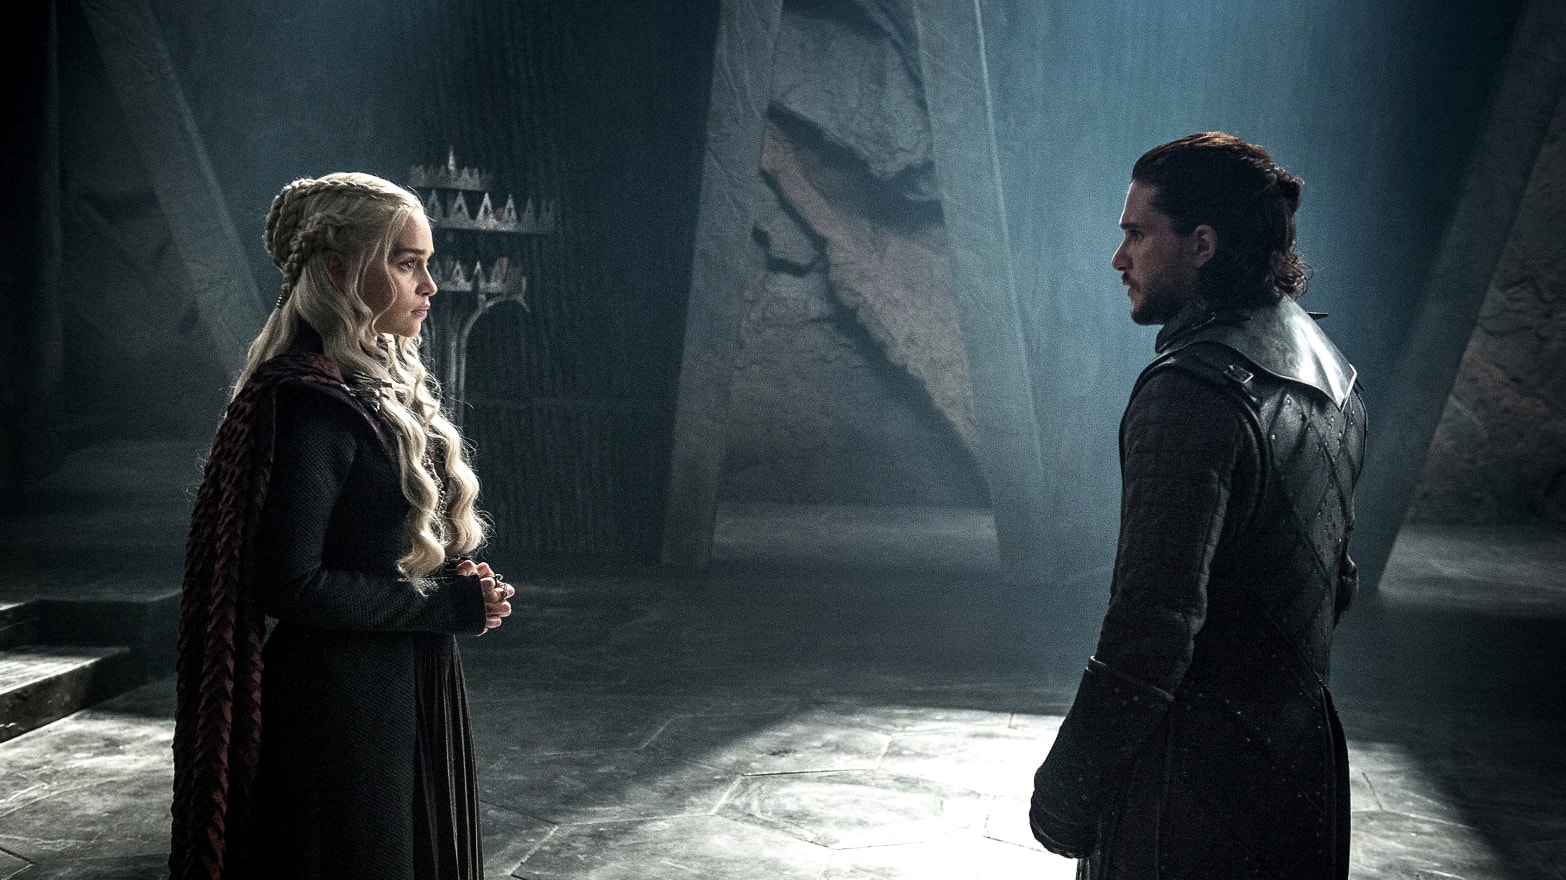 Game Of Thrones Hints At Incestuous Romance Between Jon Snow And